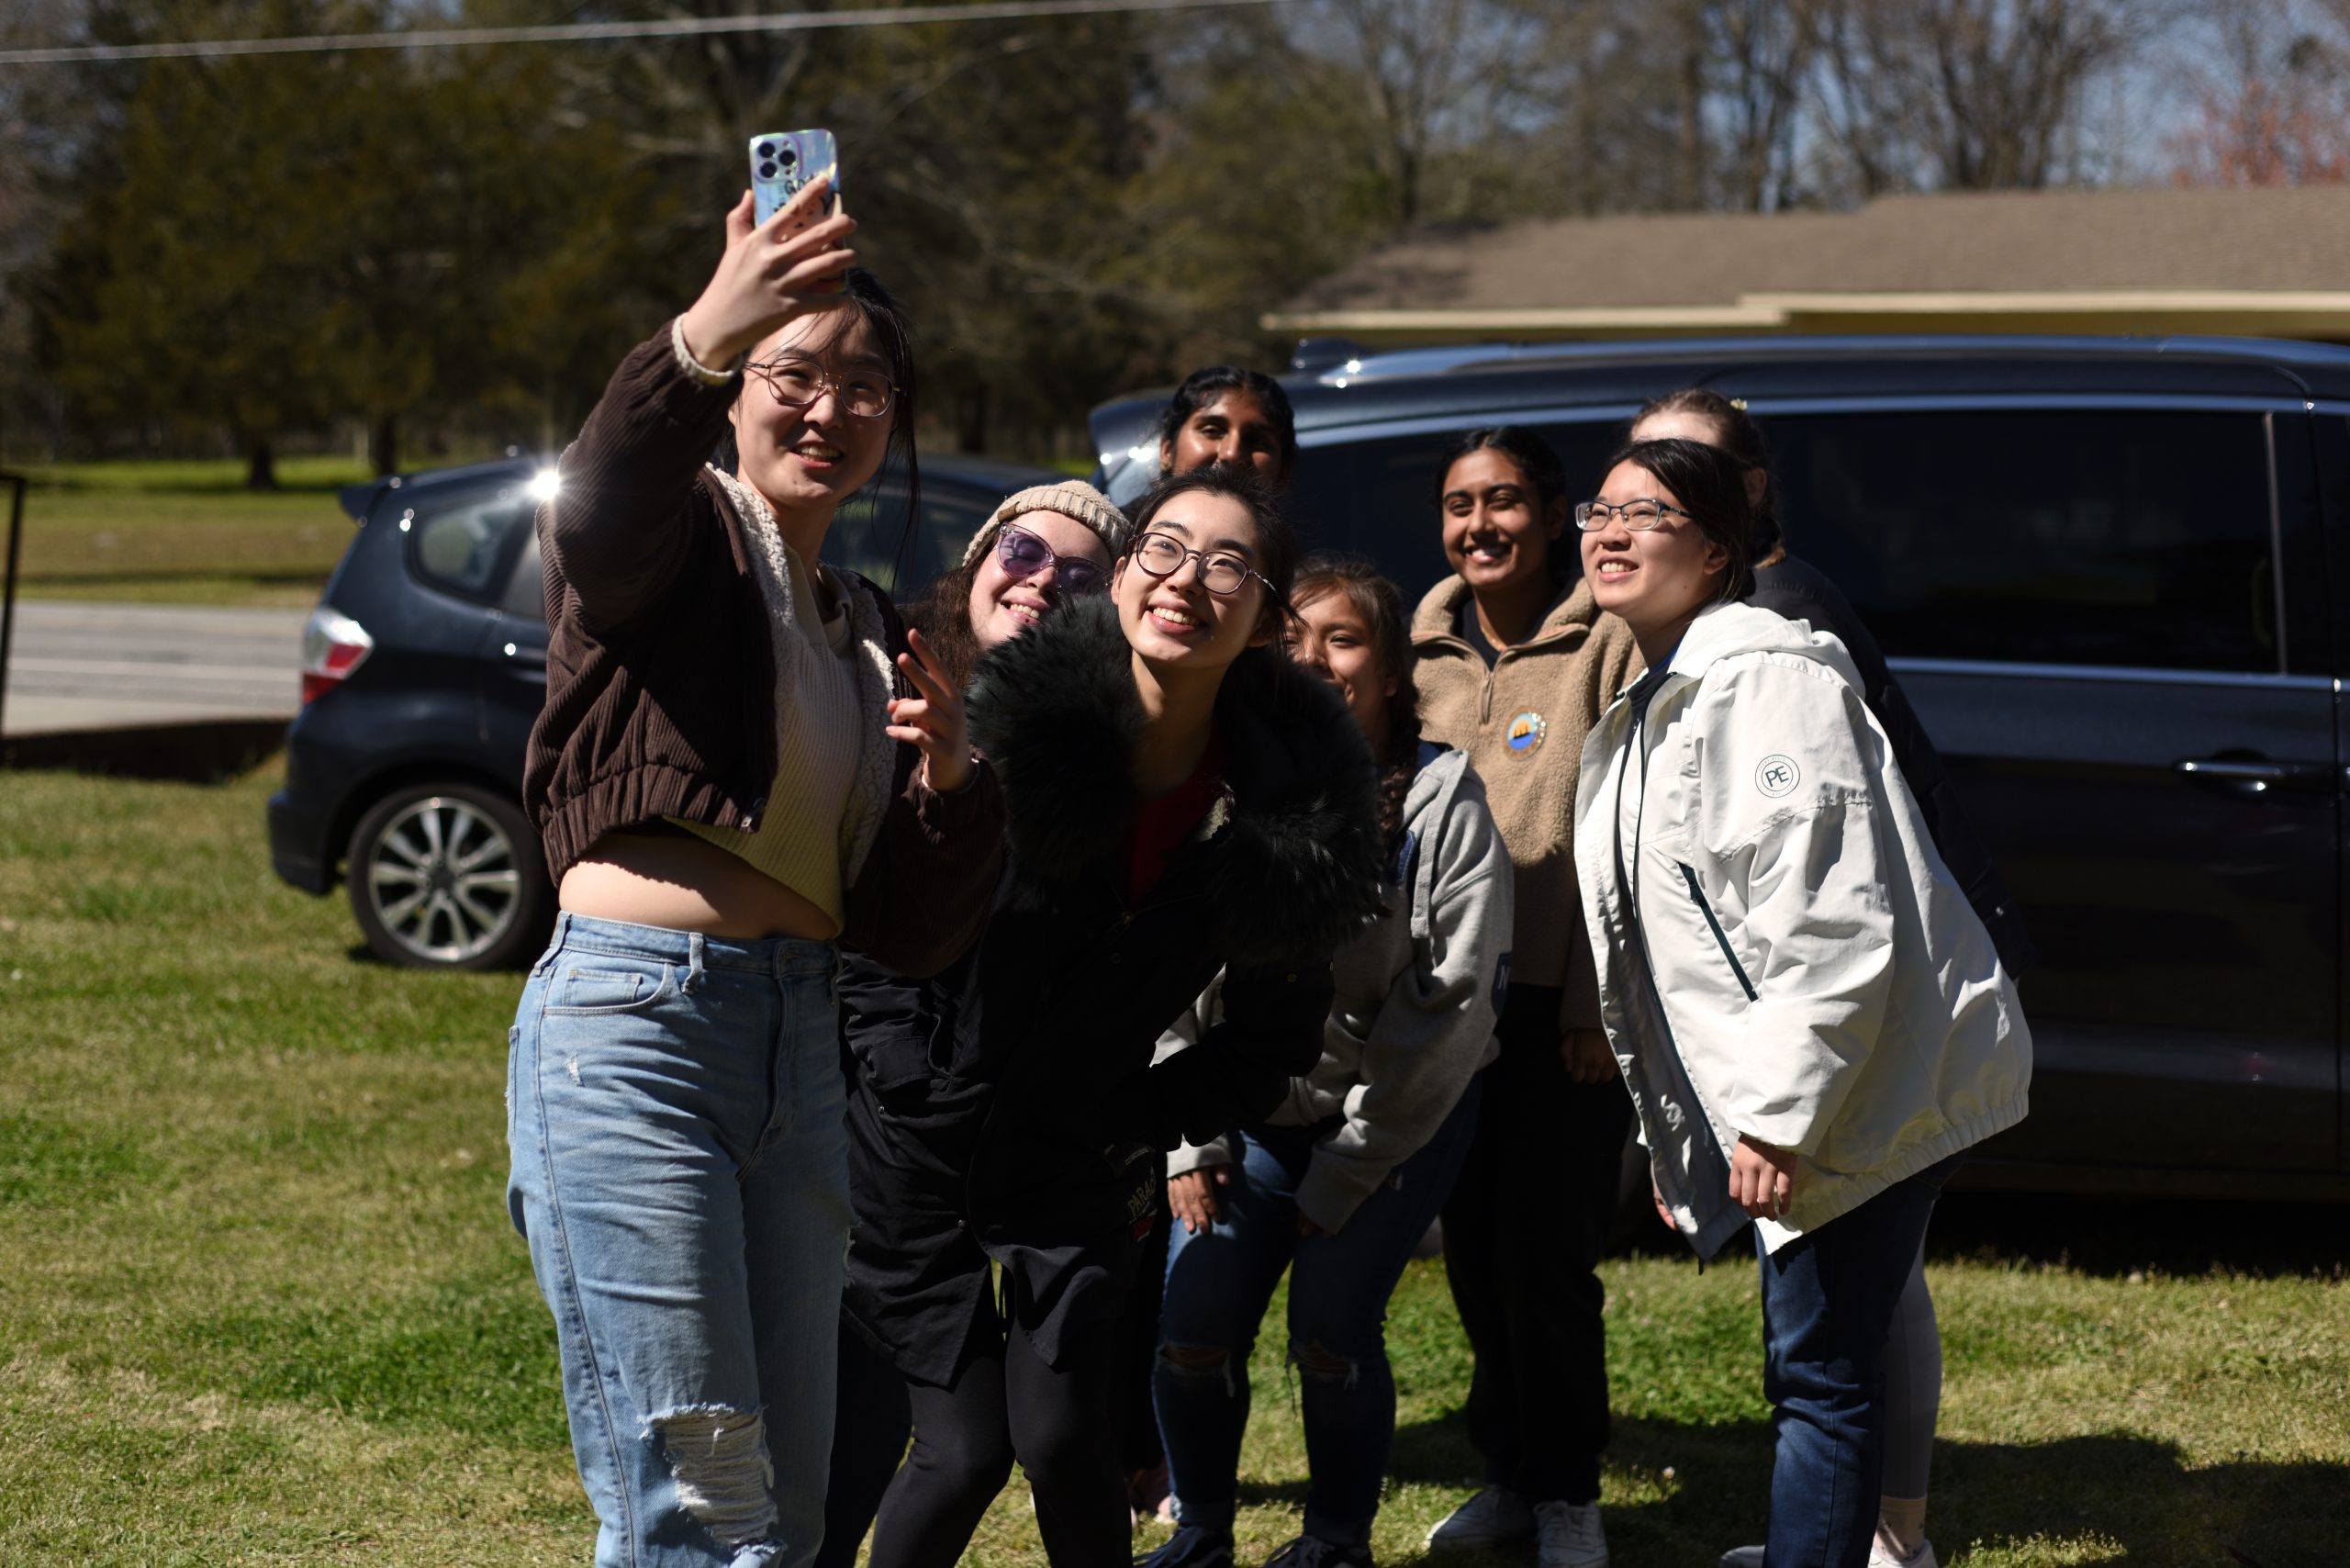 A group of college students posed in front of a van taking a selfie photo.